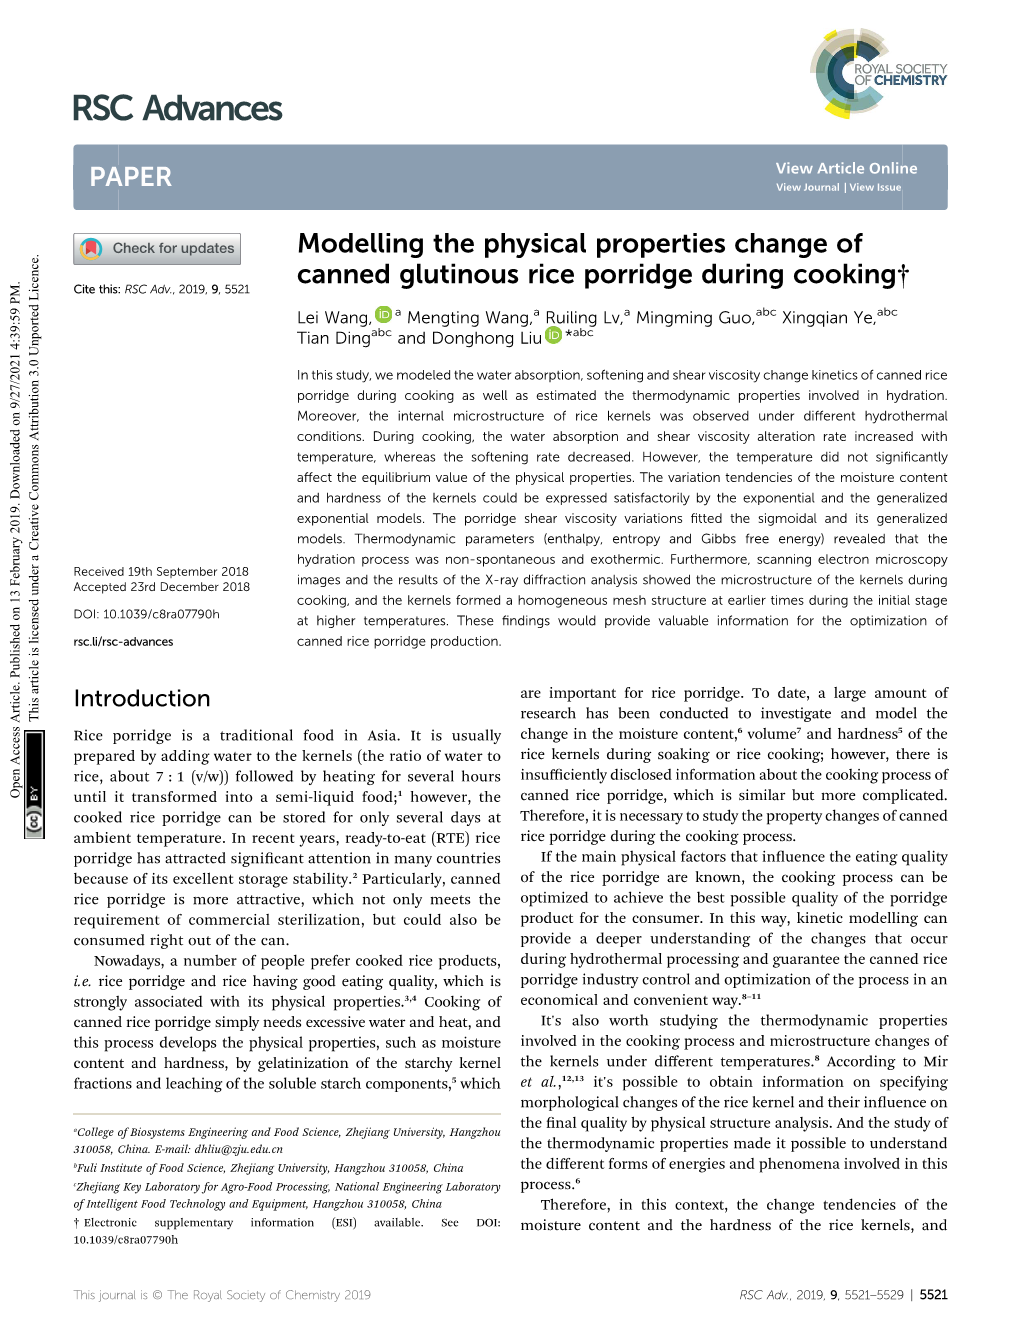 Modelling the Physical Properties Change of Canned Glutinous Rice